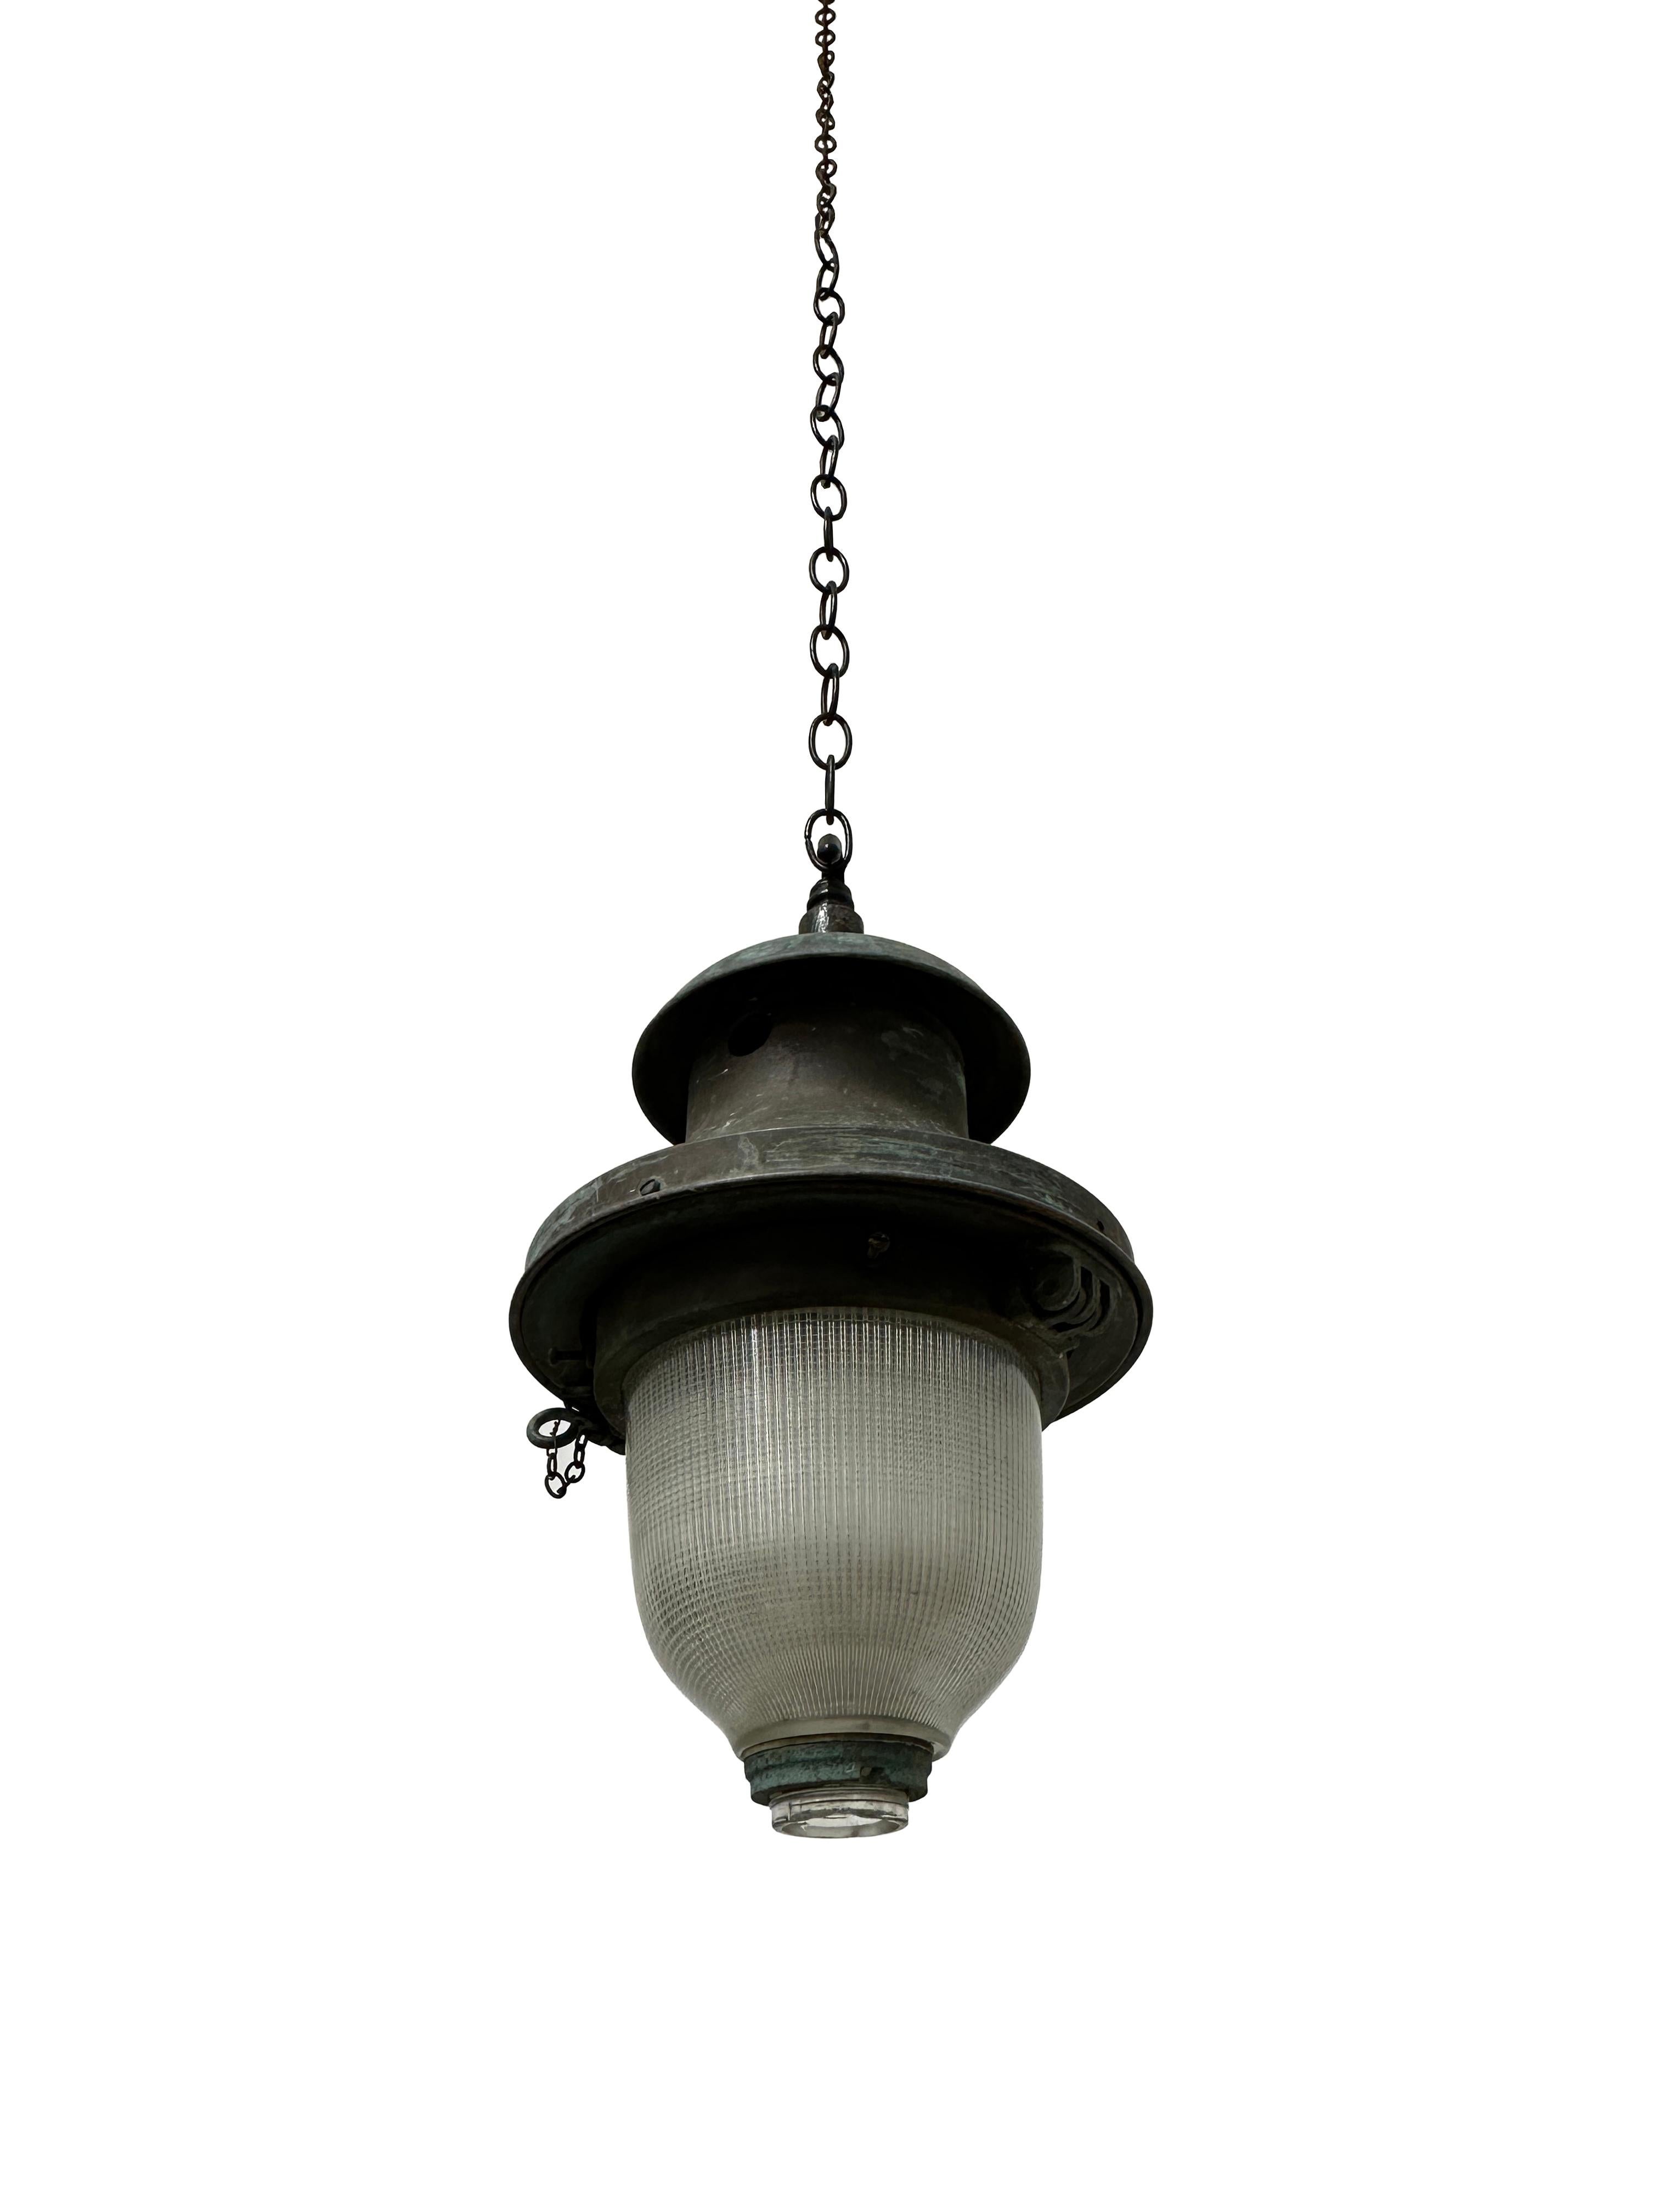 Antique Industrial French Holophane Devant Ceiling Pendant Street Light Lamp In Good Condition For Sale In Sale, GB